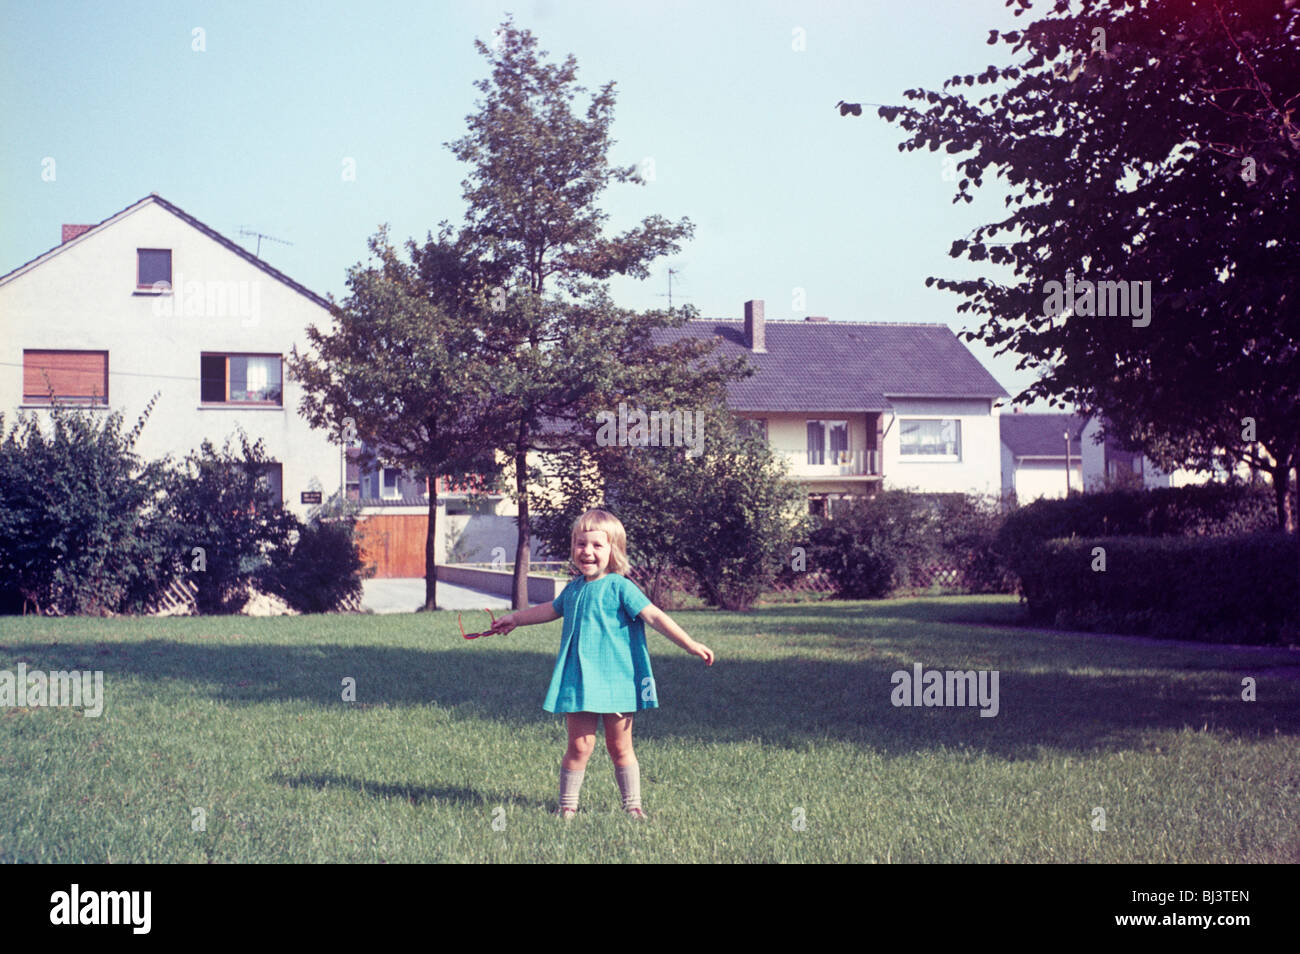 A young blonde girl of approximately 3 years-old stands on a lawn looking delighted in 1967. Stock Photo